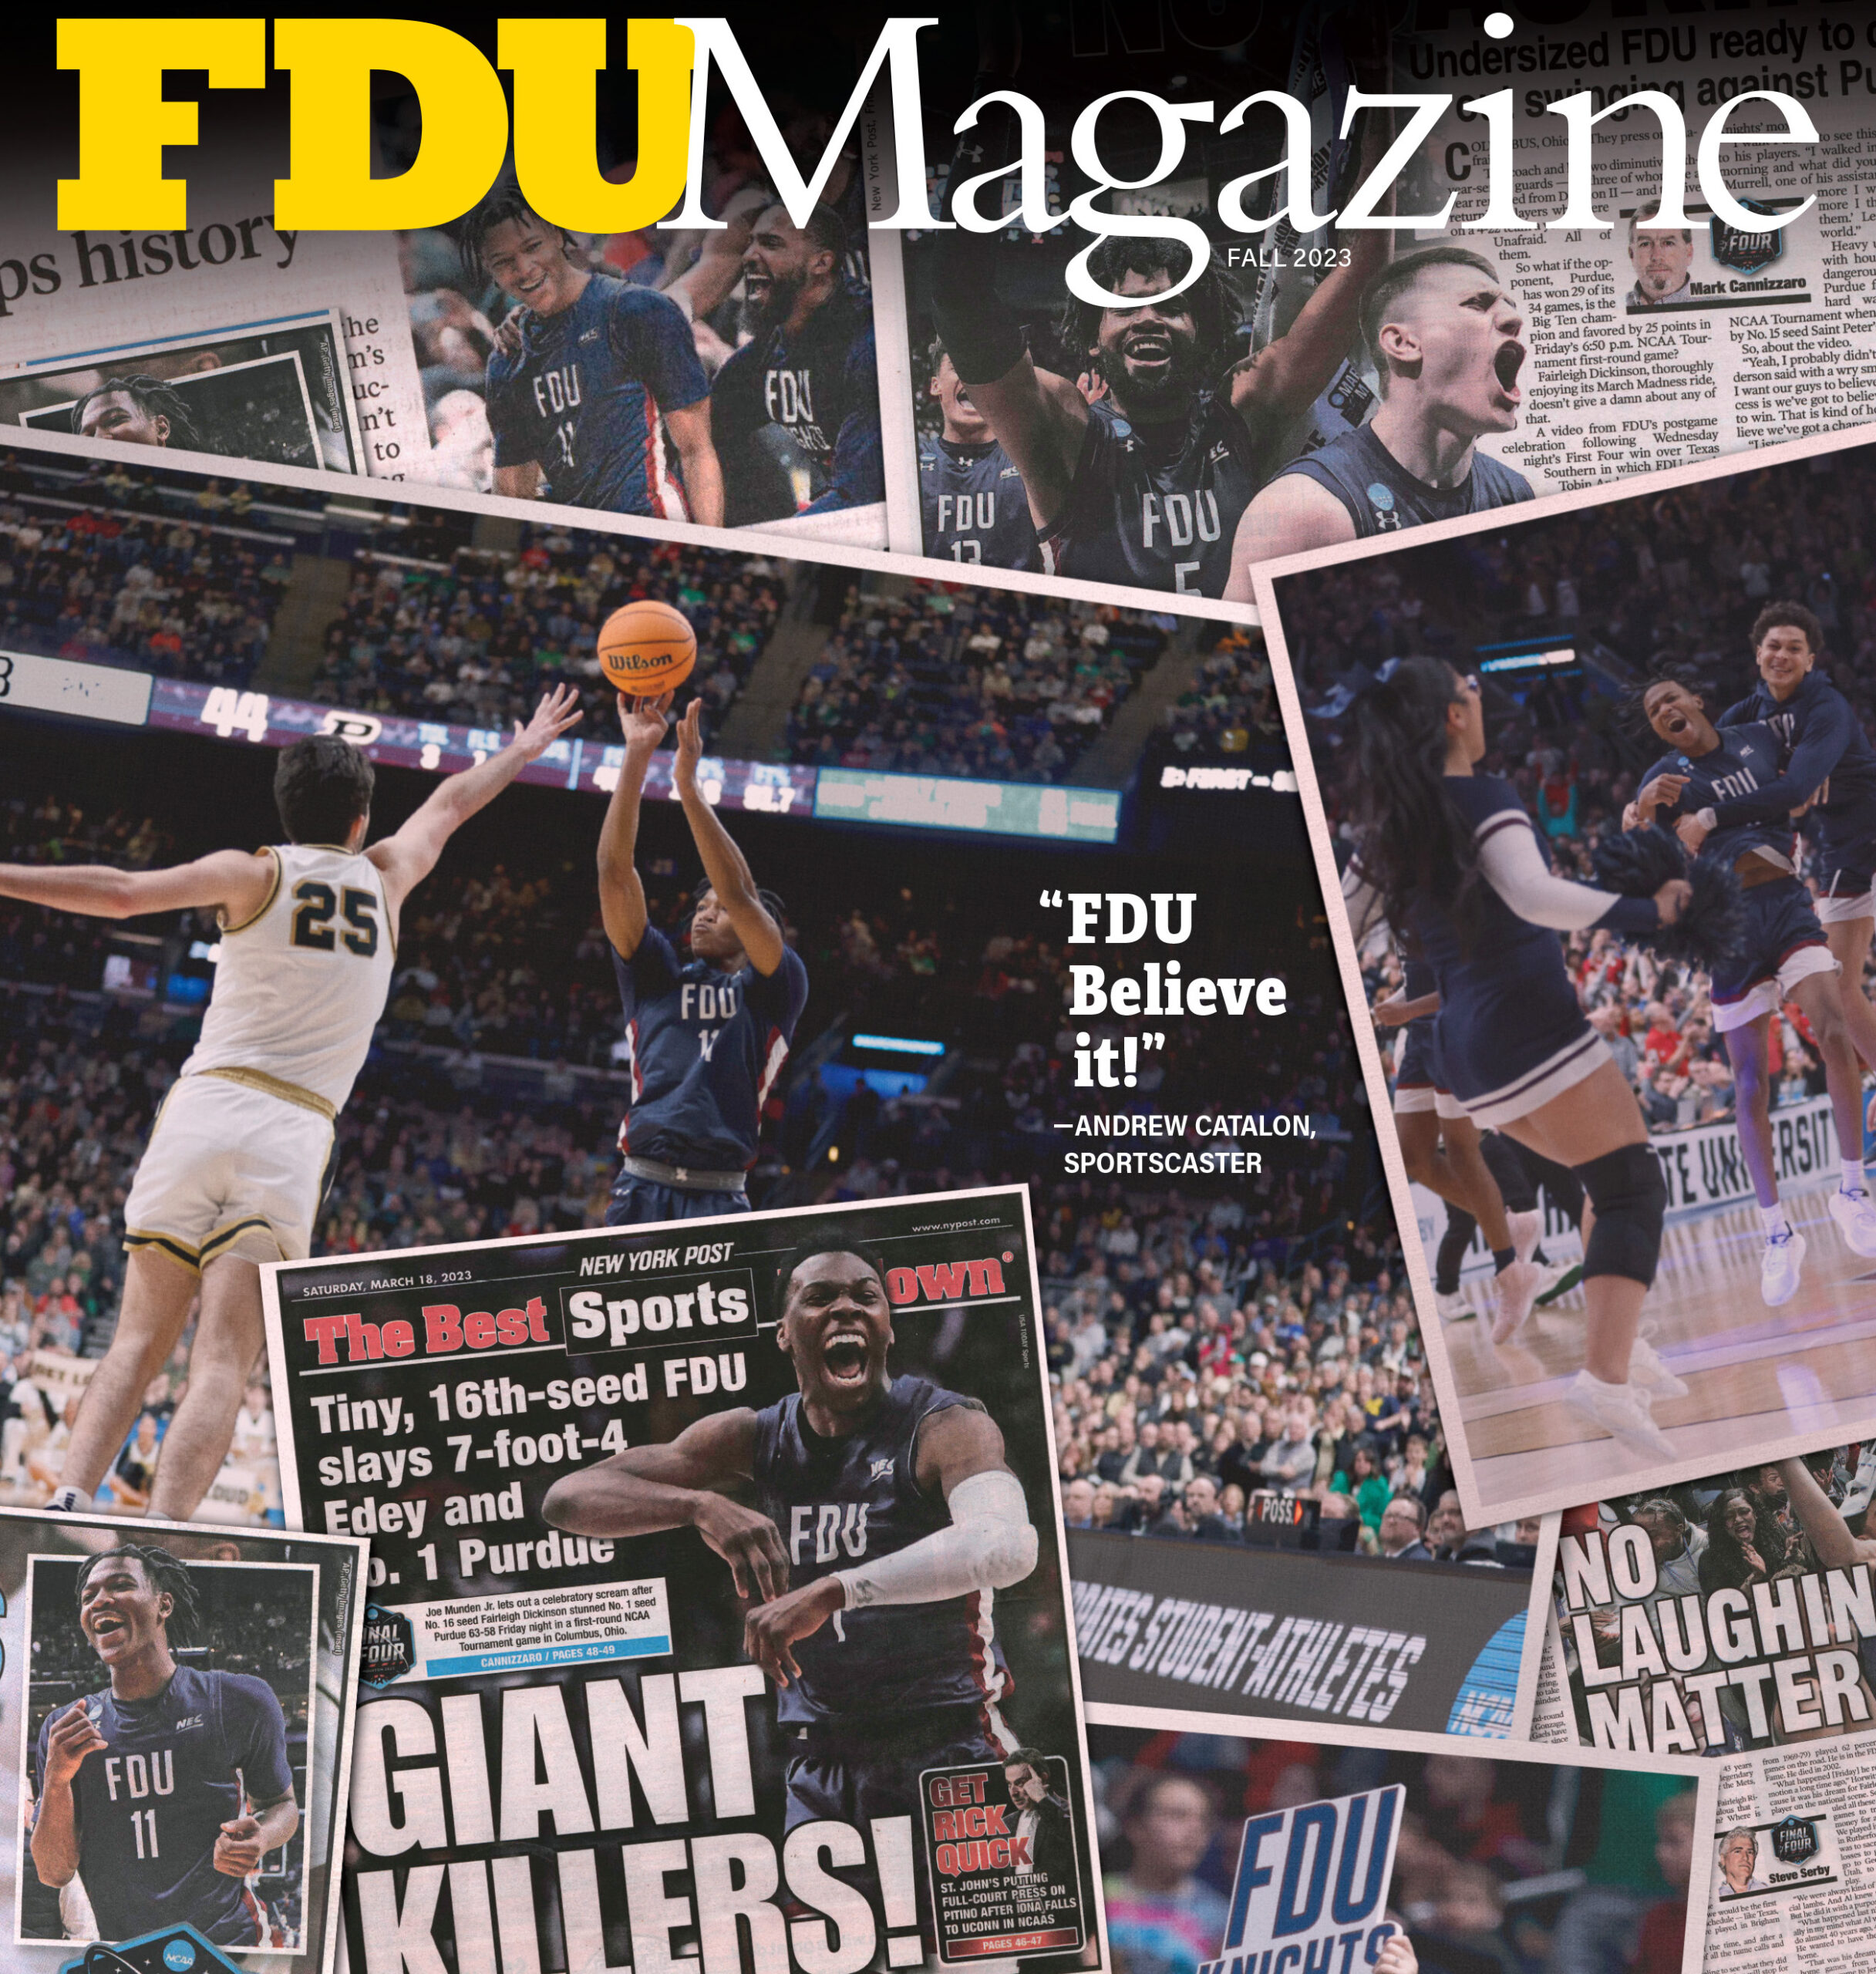 The Fall 2023 cover of FDU Magazine shows newspaper headlines and photos of the men's basketball team's NCAA win.